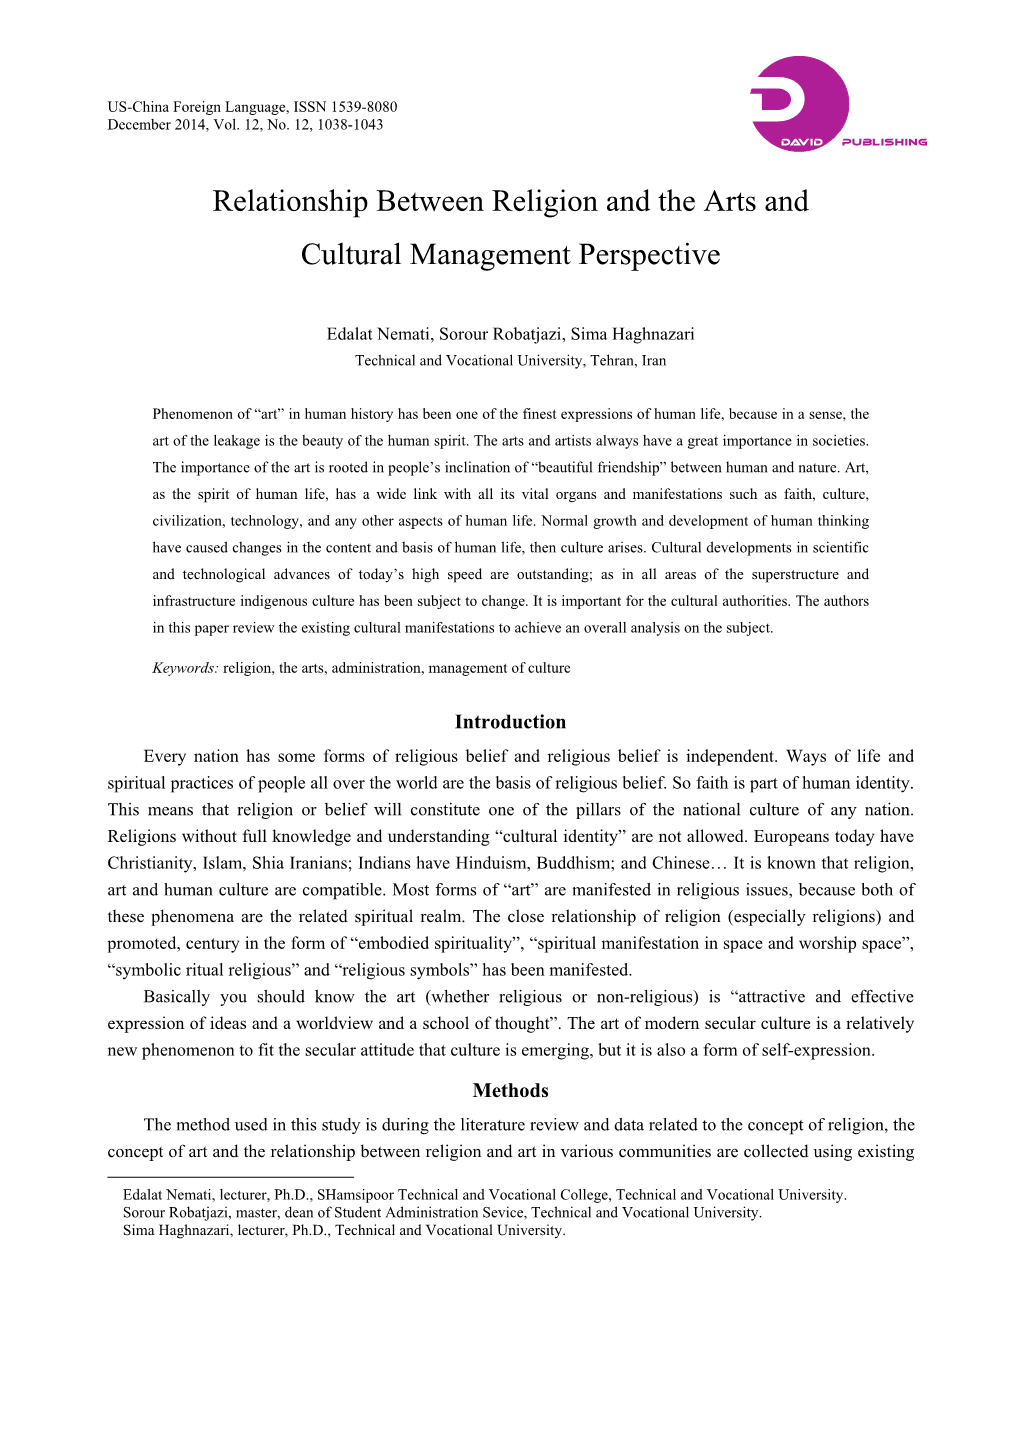 Relationship Between Religion and the Arts and Cultural Management Perspective